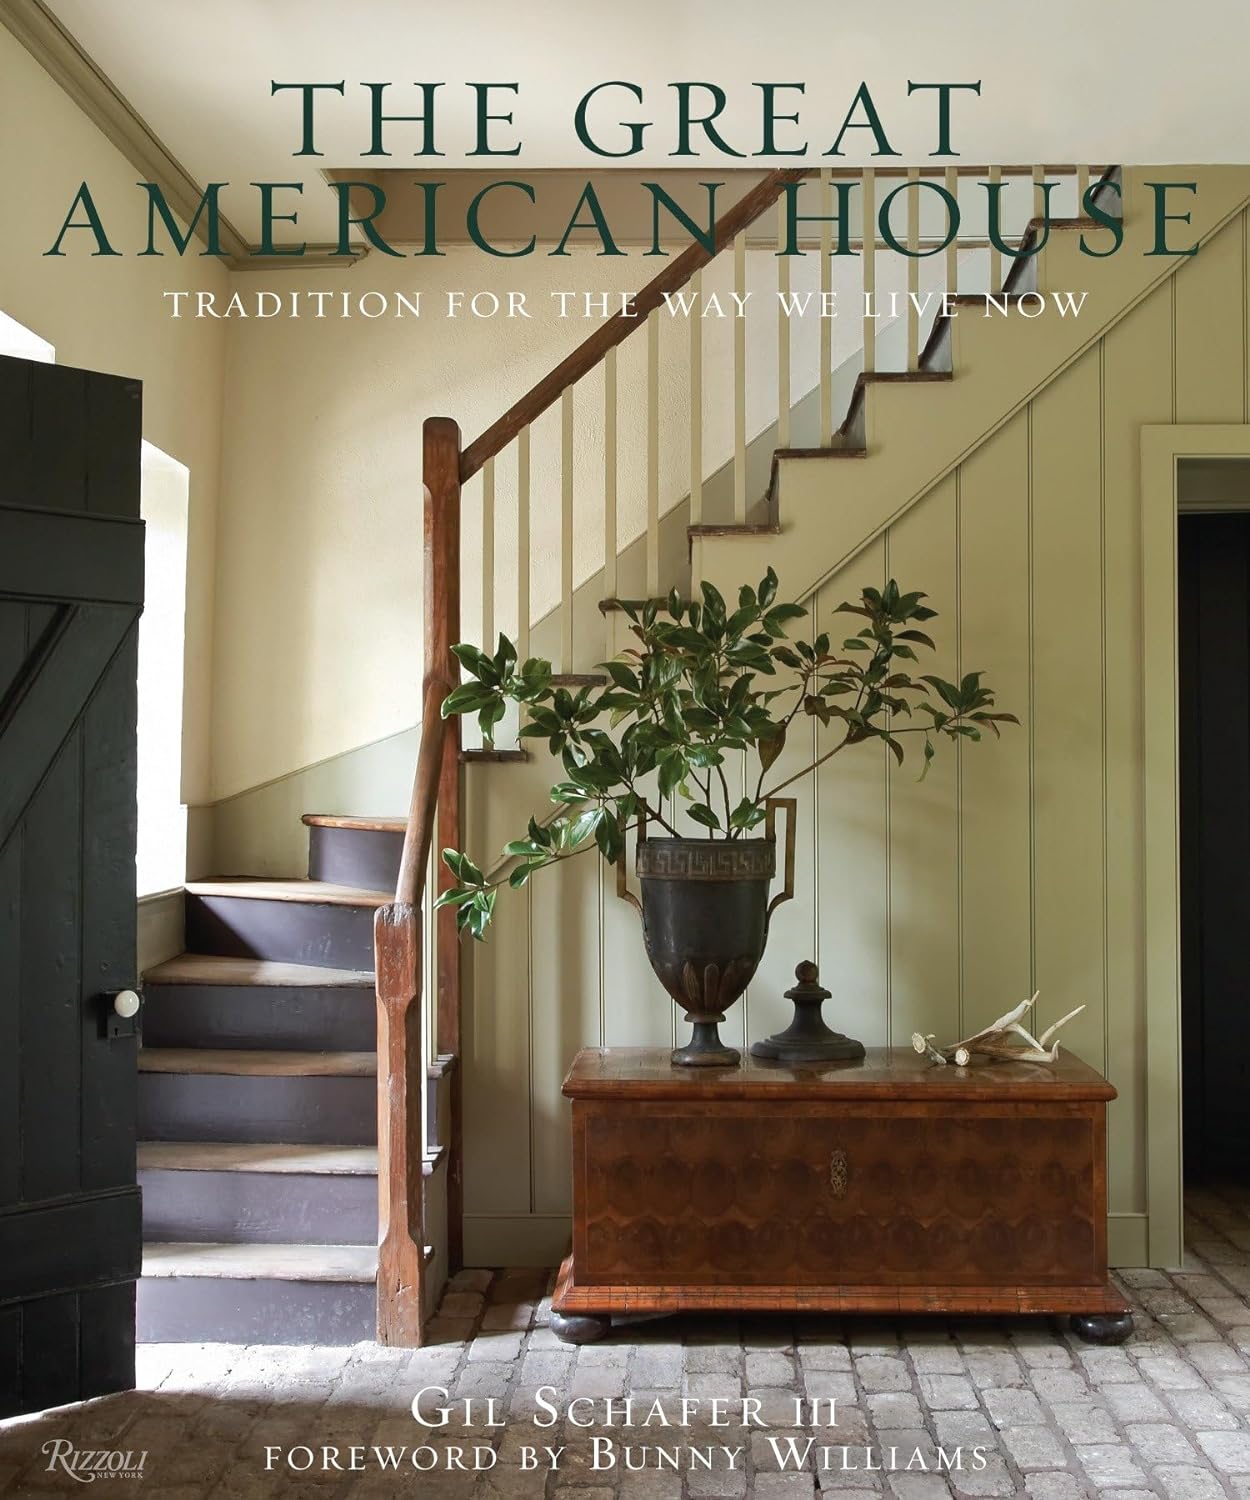 The Great American House